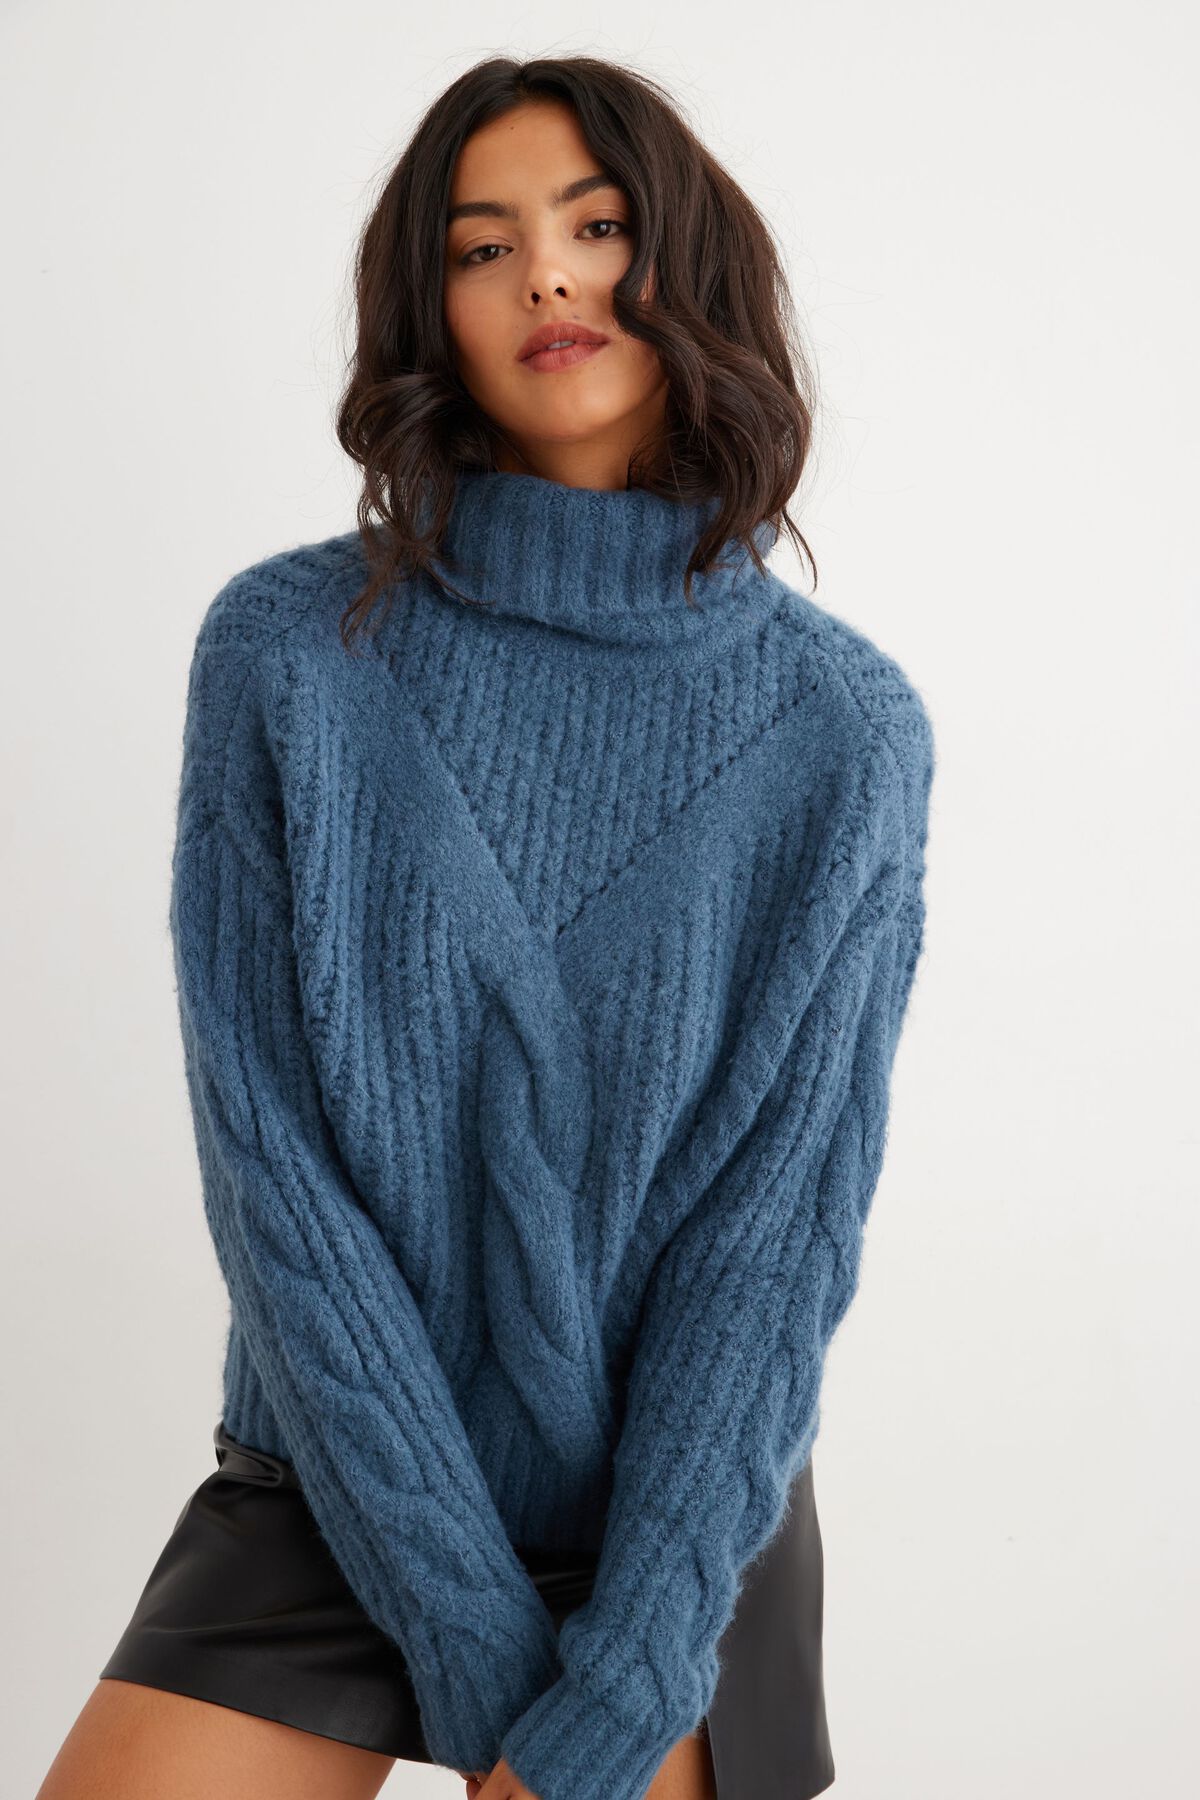 Dynamite Cable Knit Turtleneck Sweater. 1